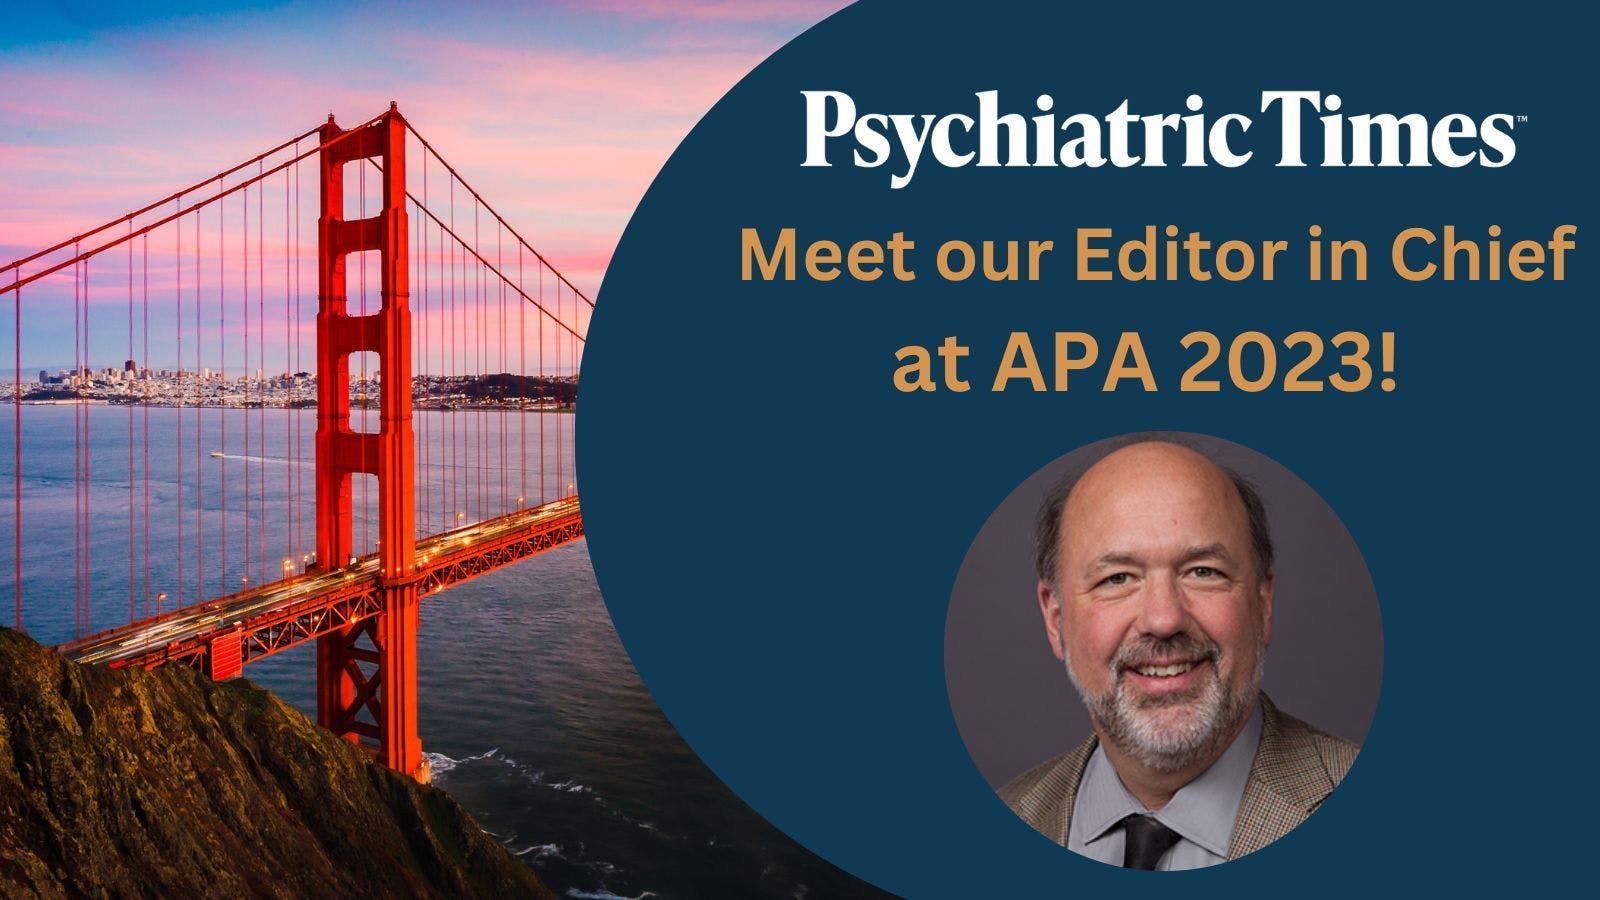 Meet Our Editor in Chief at APA 2023!